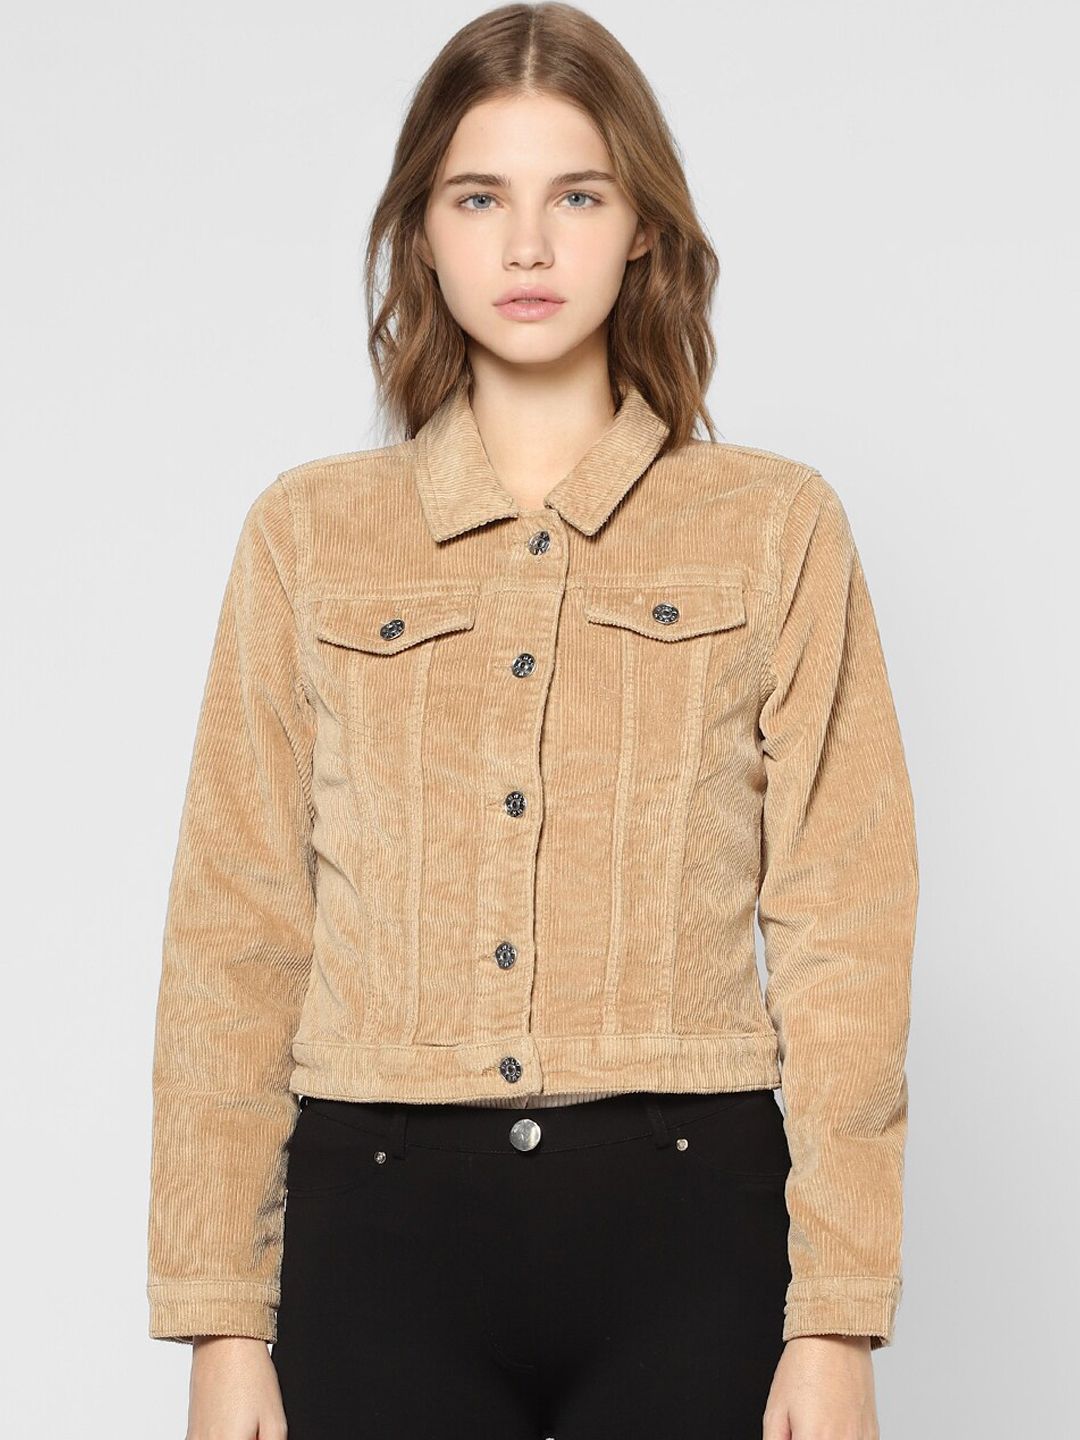 ONLY Women Beige Striped Crop Tailored Jacket Price in India